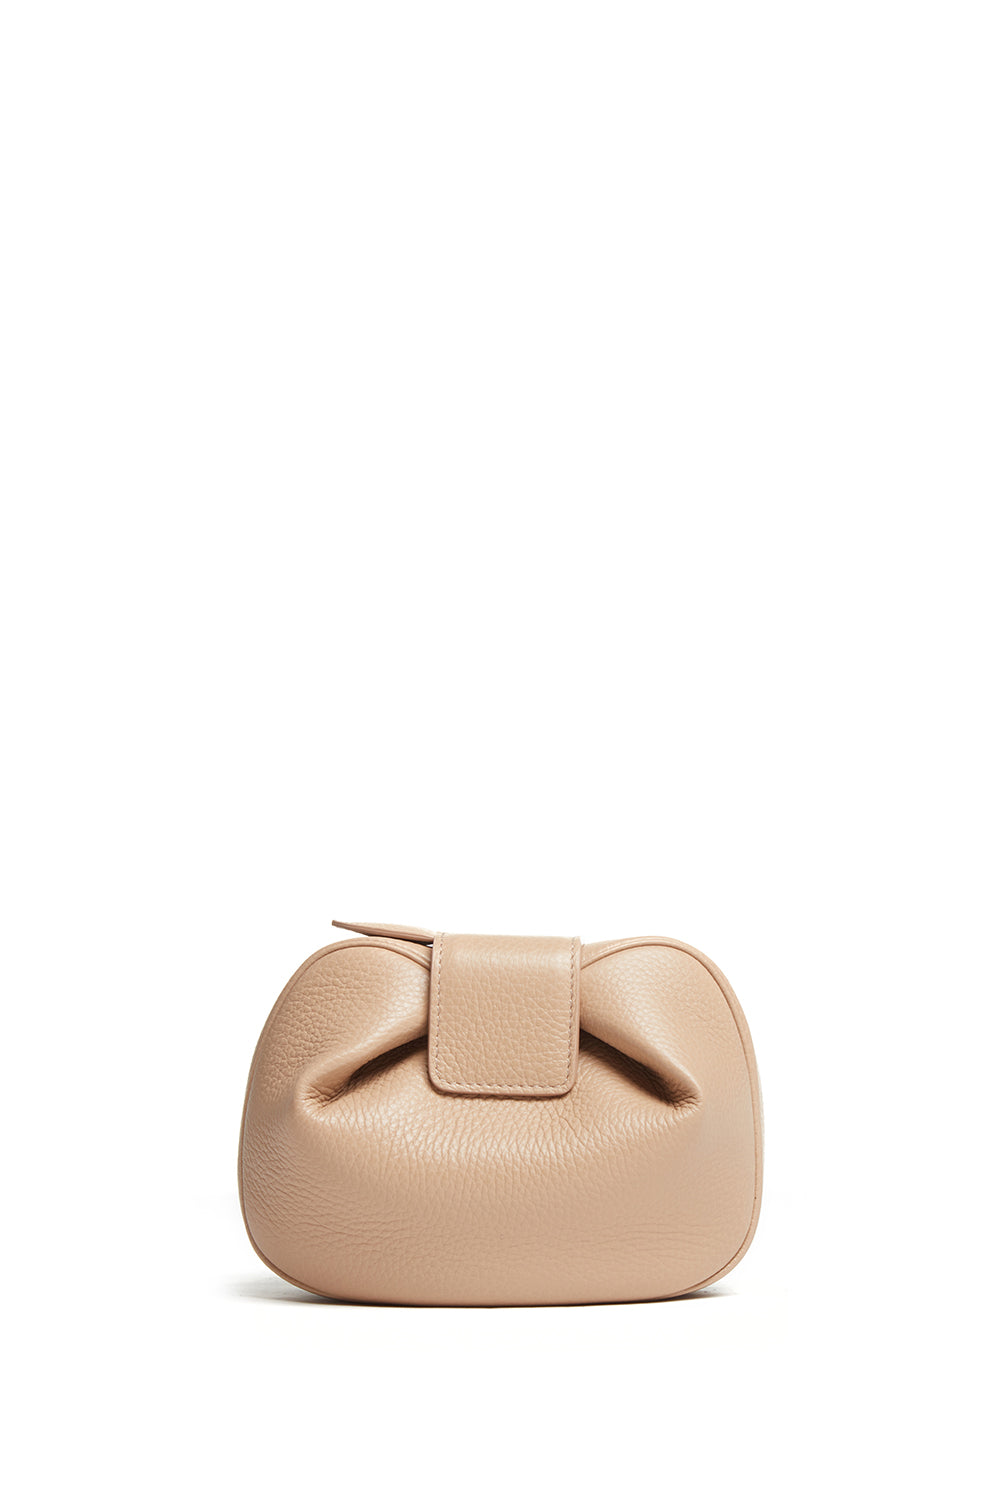 Soft Demi Clutch in Nude Leather